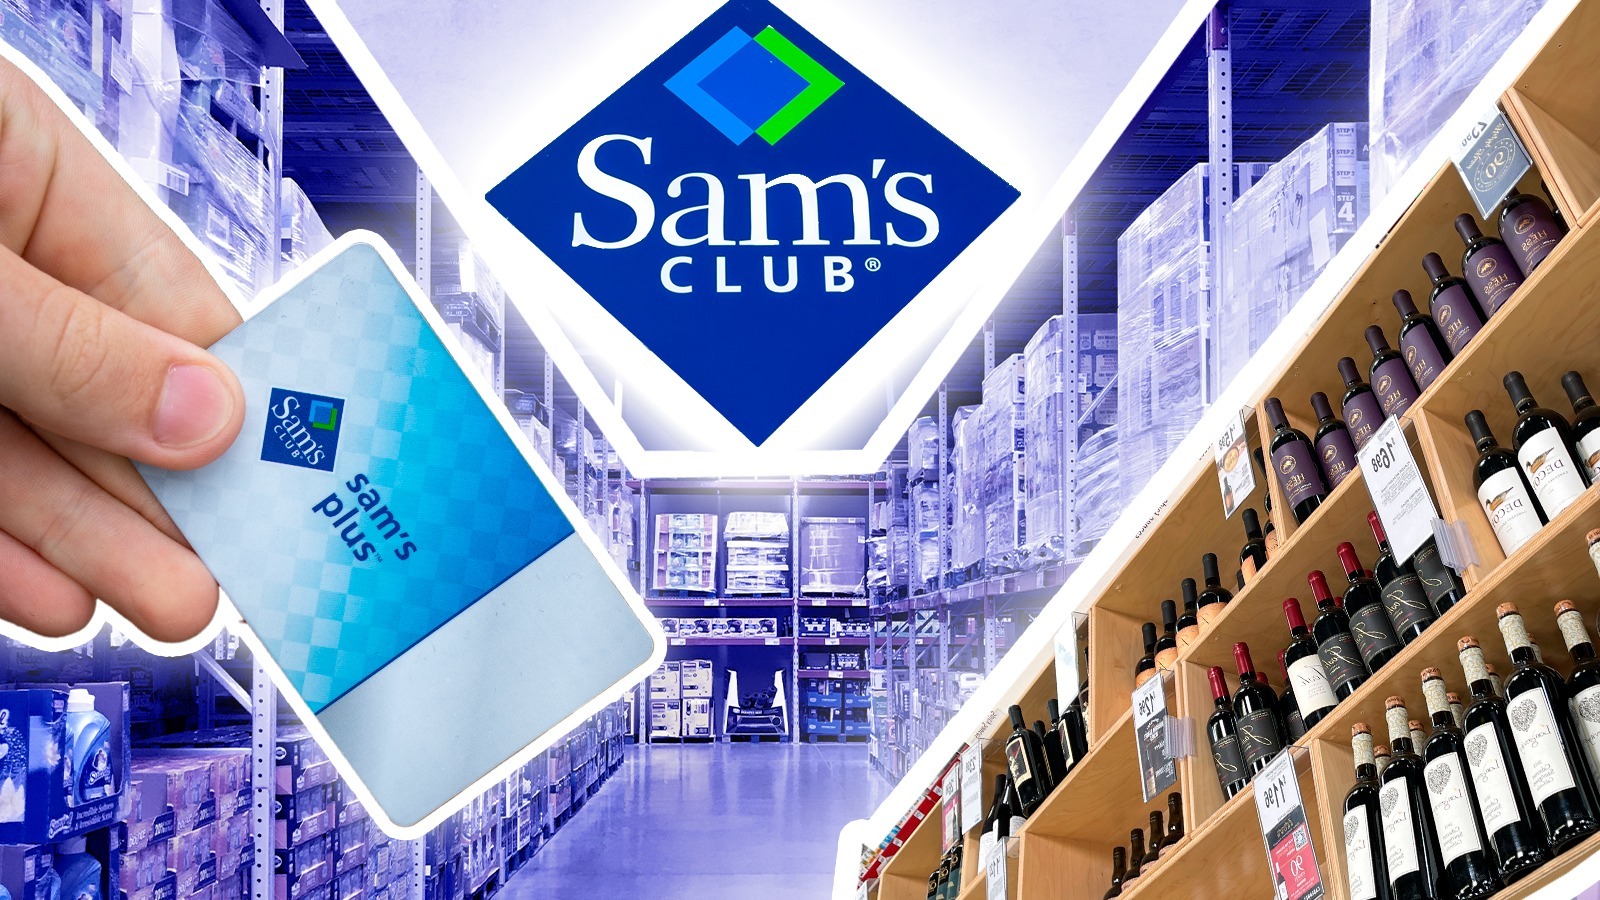 The Best Grocery Items on Sale at Sam's Club This Month